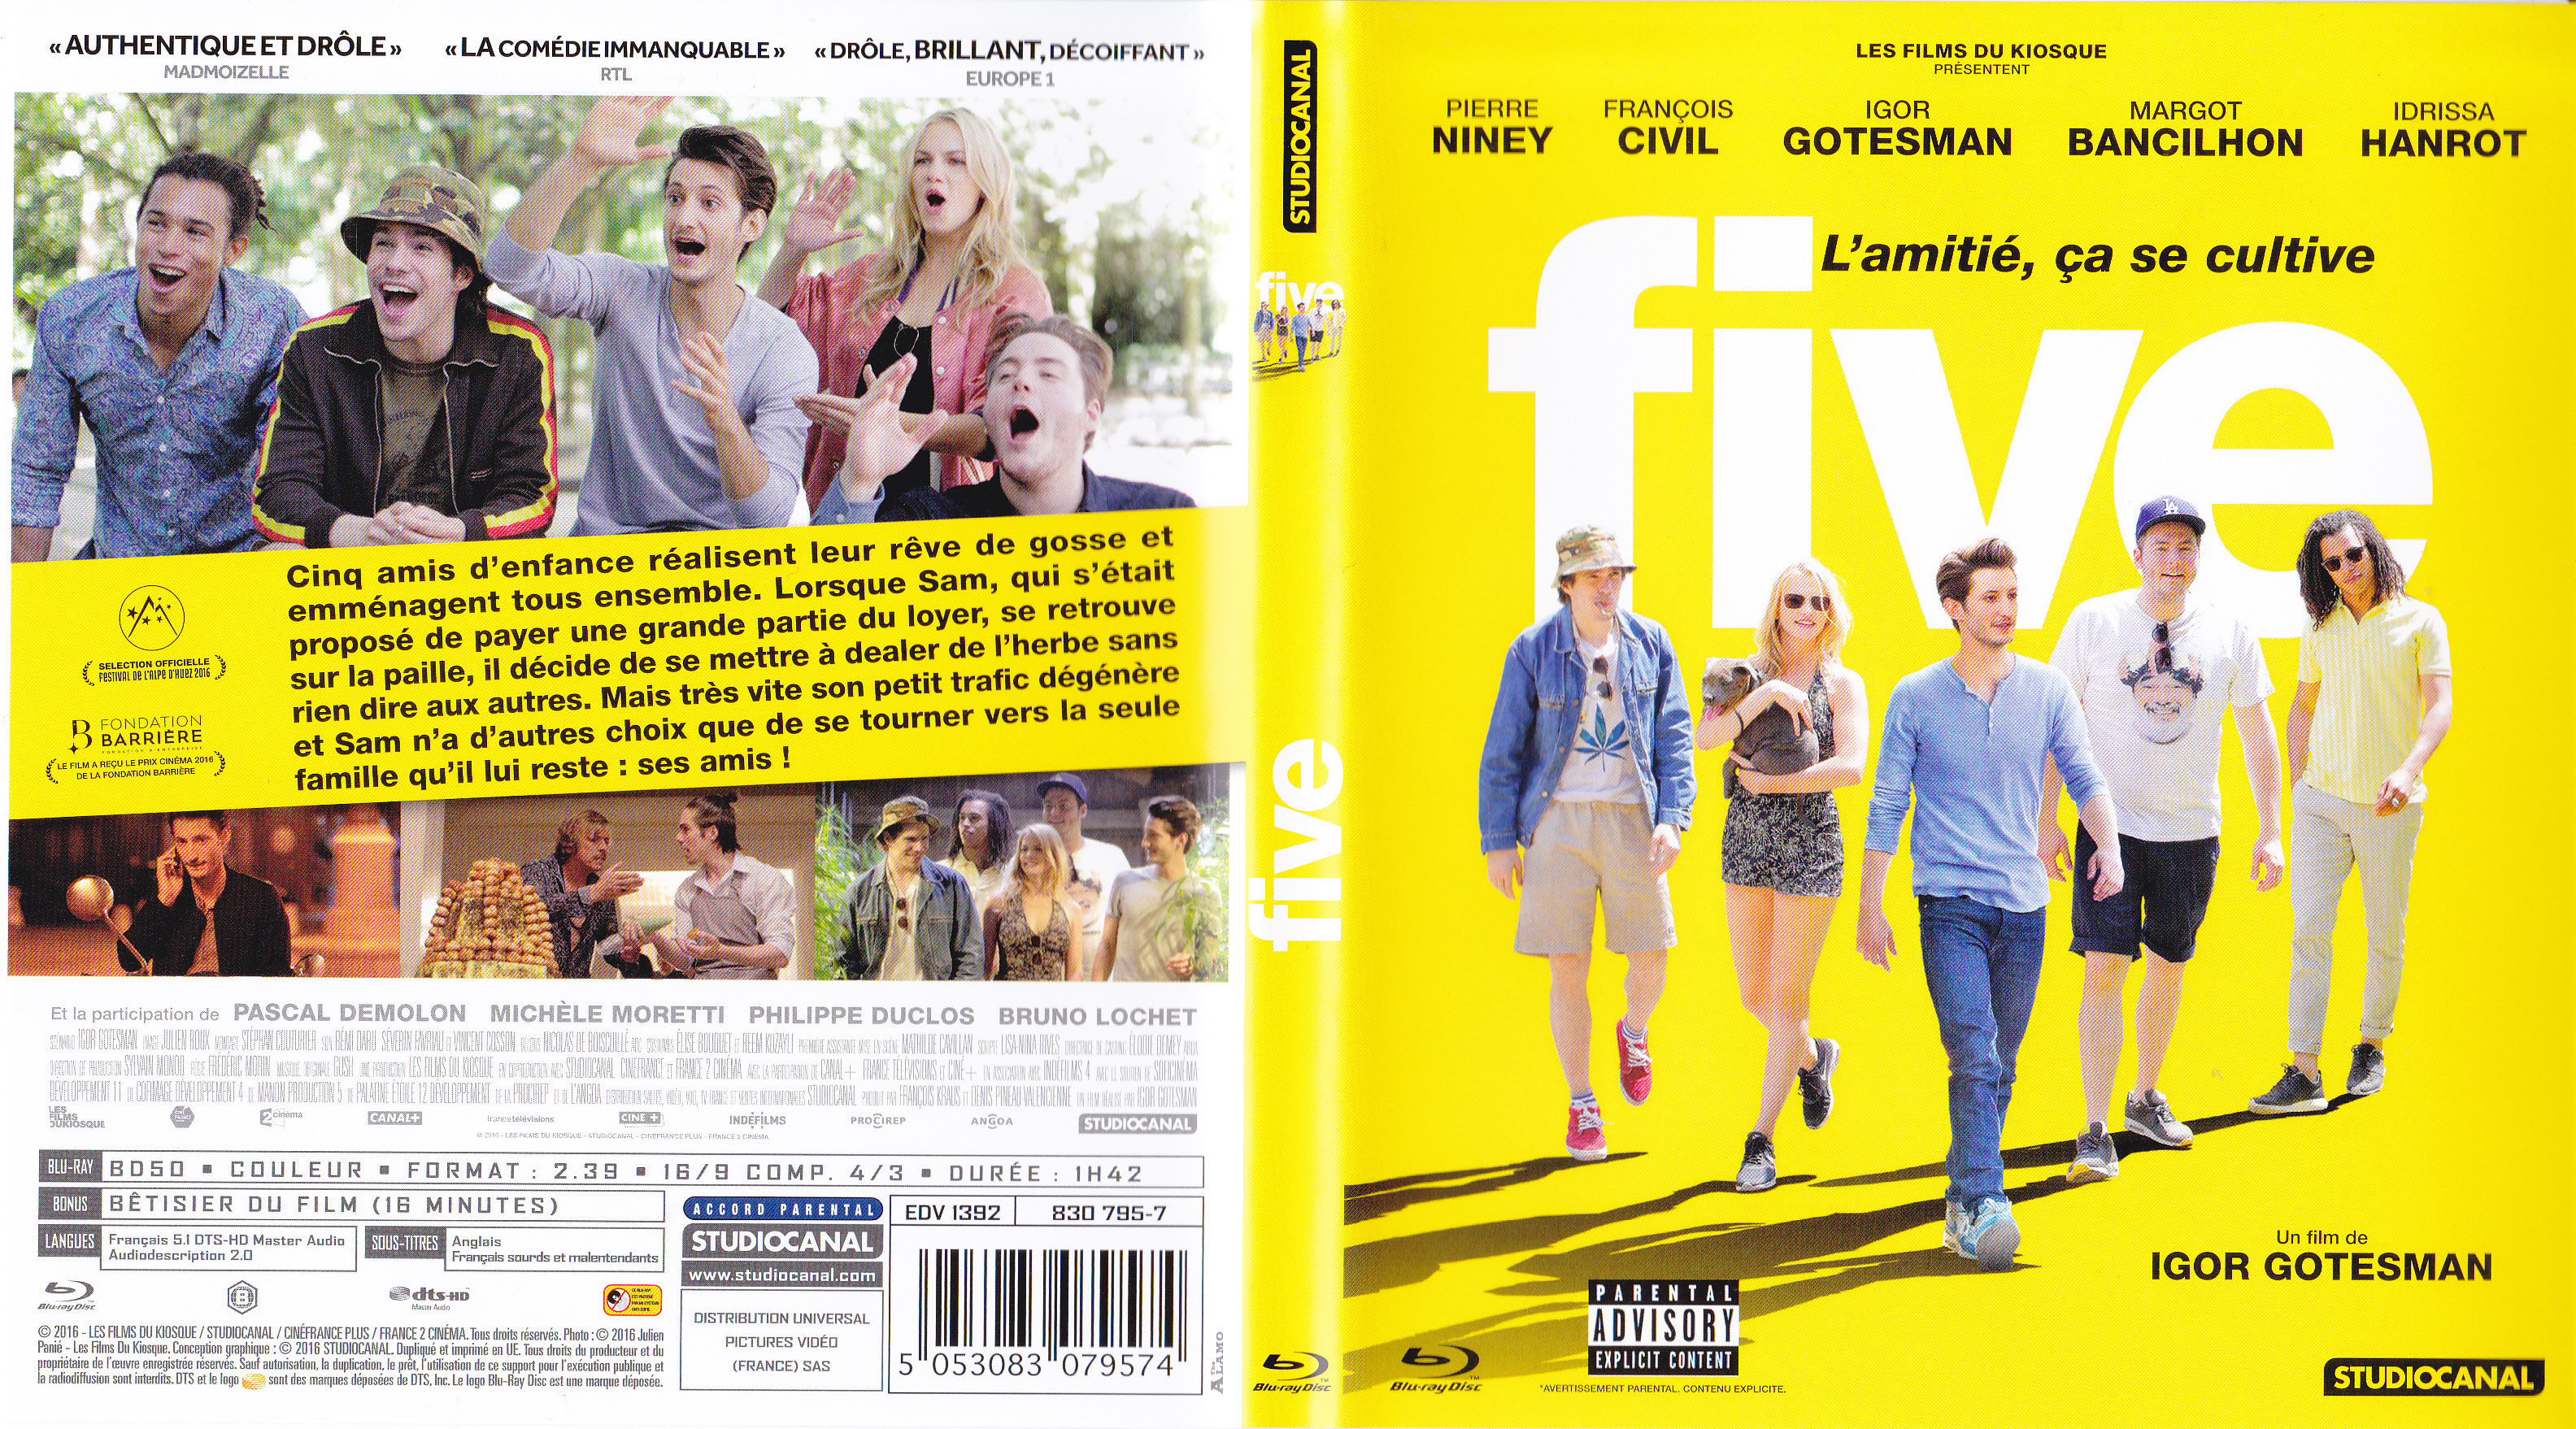 Jaquette DVD Five (BLU-RAY)